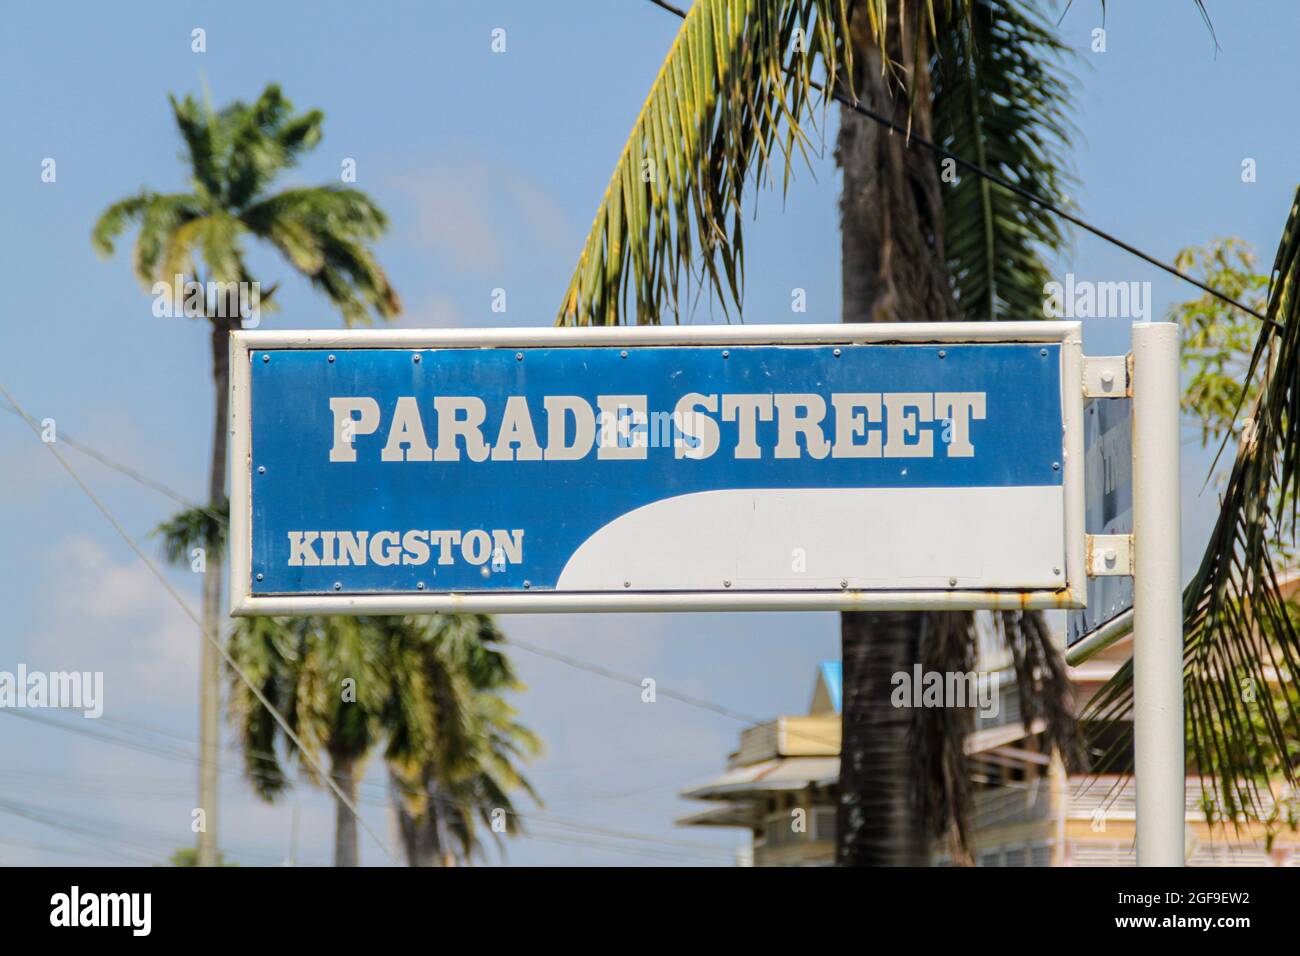 Parade Street name sign in Georgetown, Guayana Stock Photo